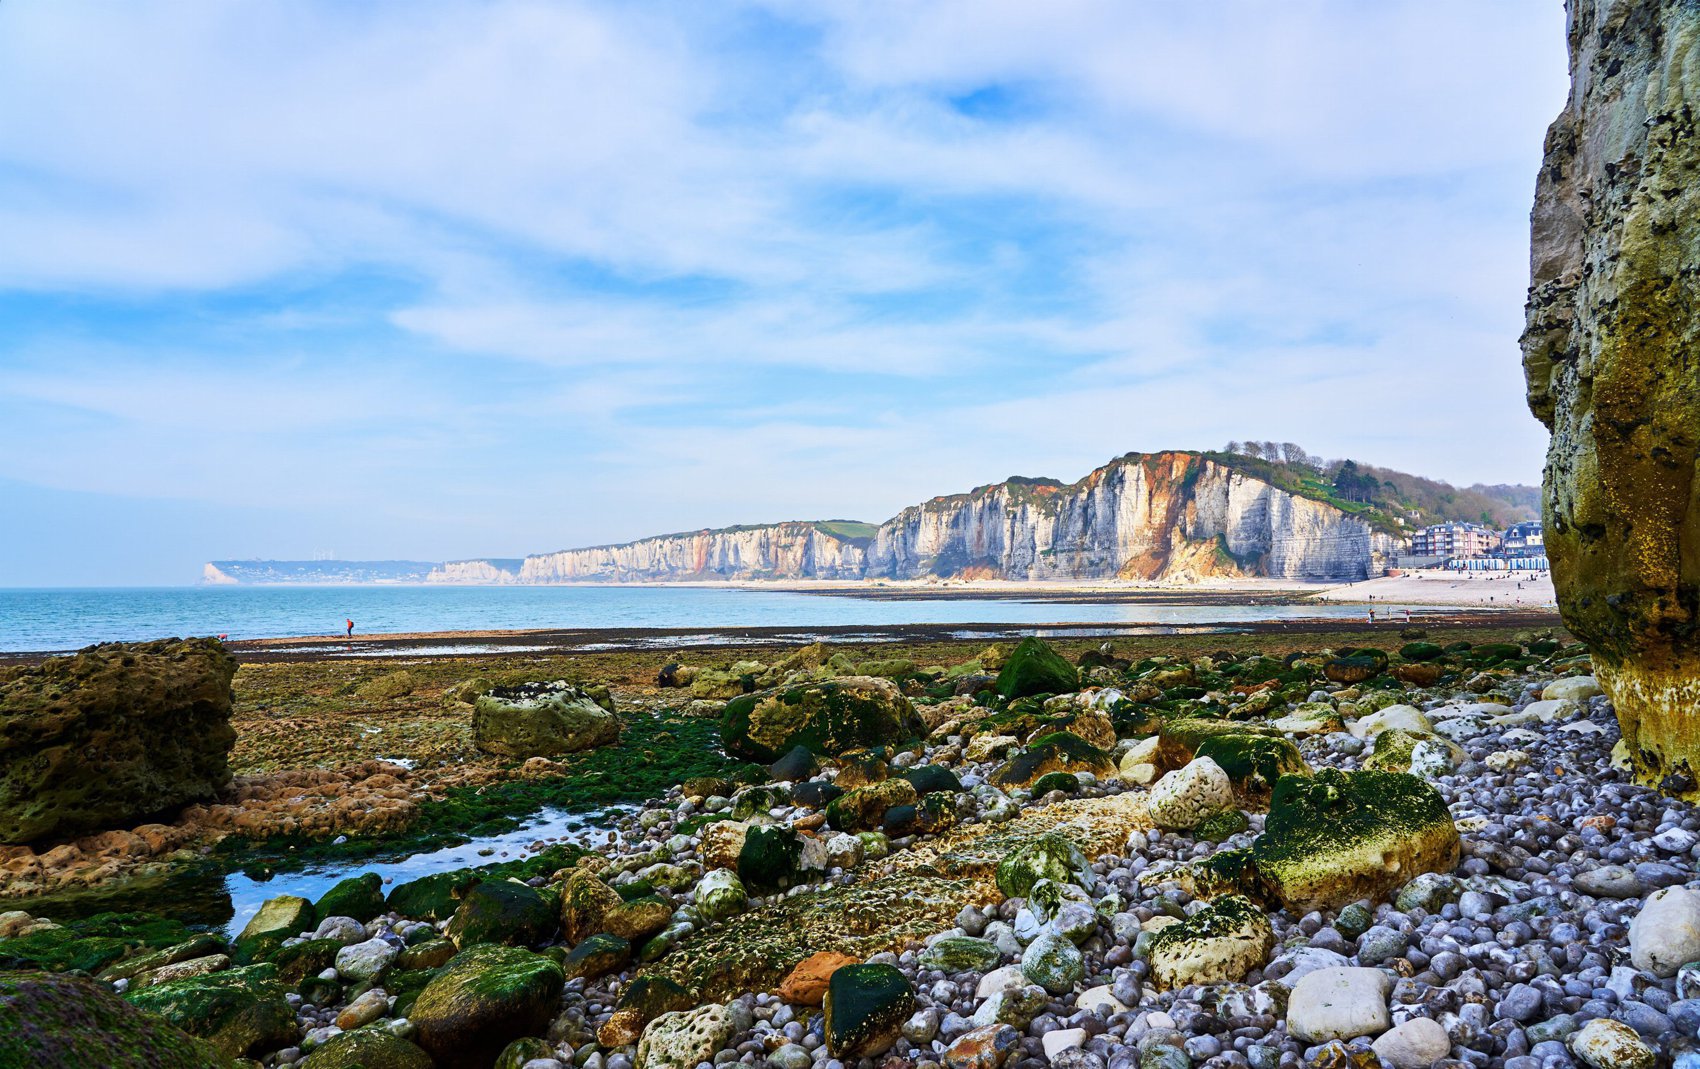 Hero Image forYport (Pebble Beach, Cliff), Normandy Spring 201904